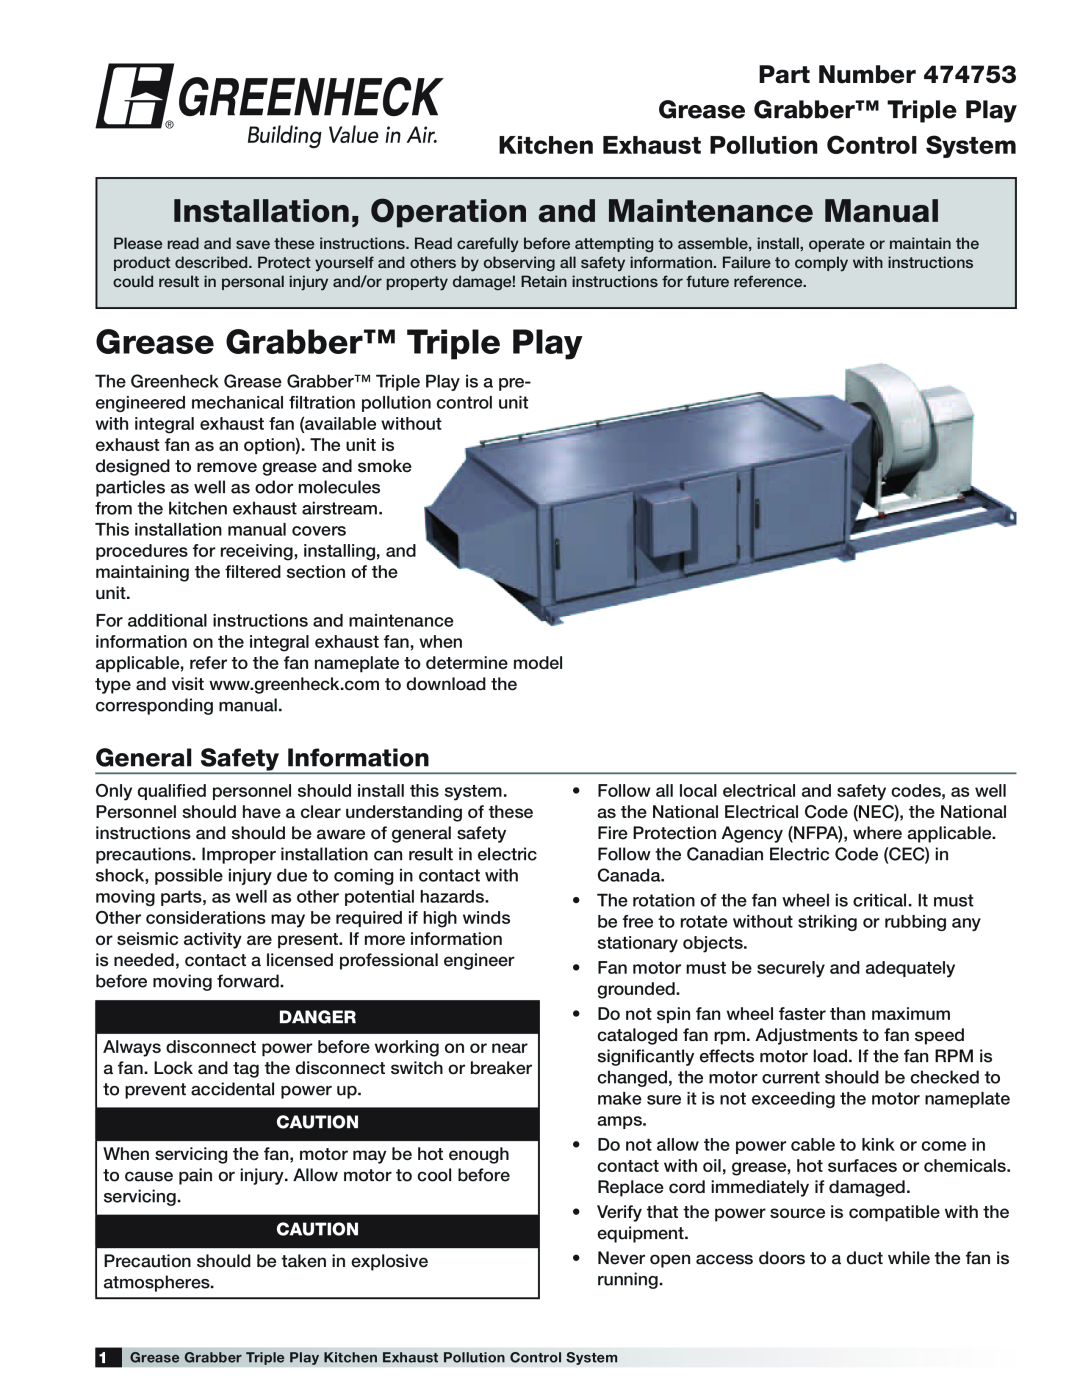 Greenheck Fan 474753 installation manual Part Number Grease Grabber Triple Play, Kitchen Exhaust Pollution Control System 